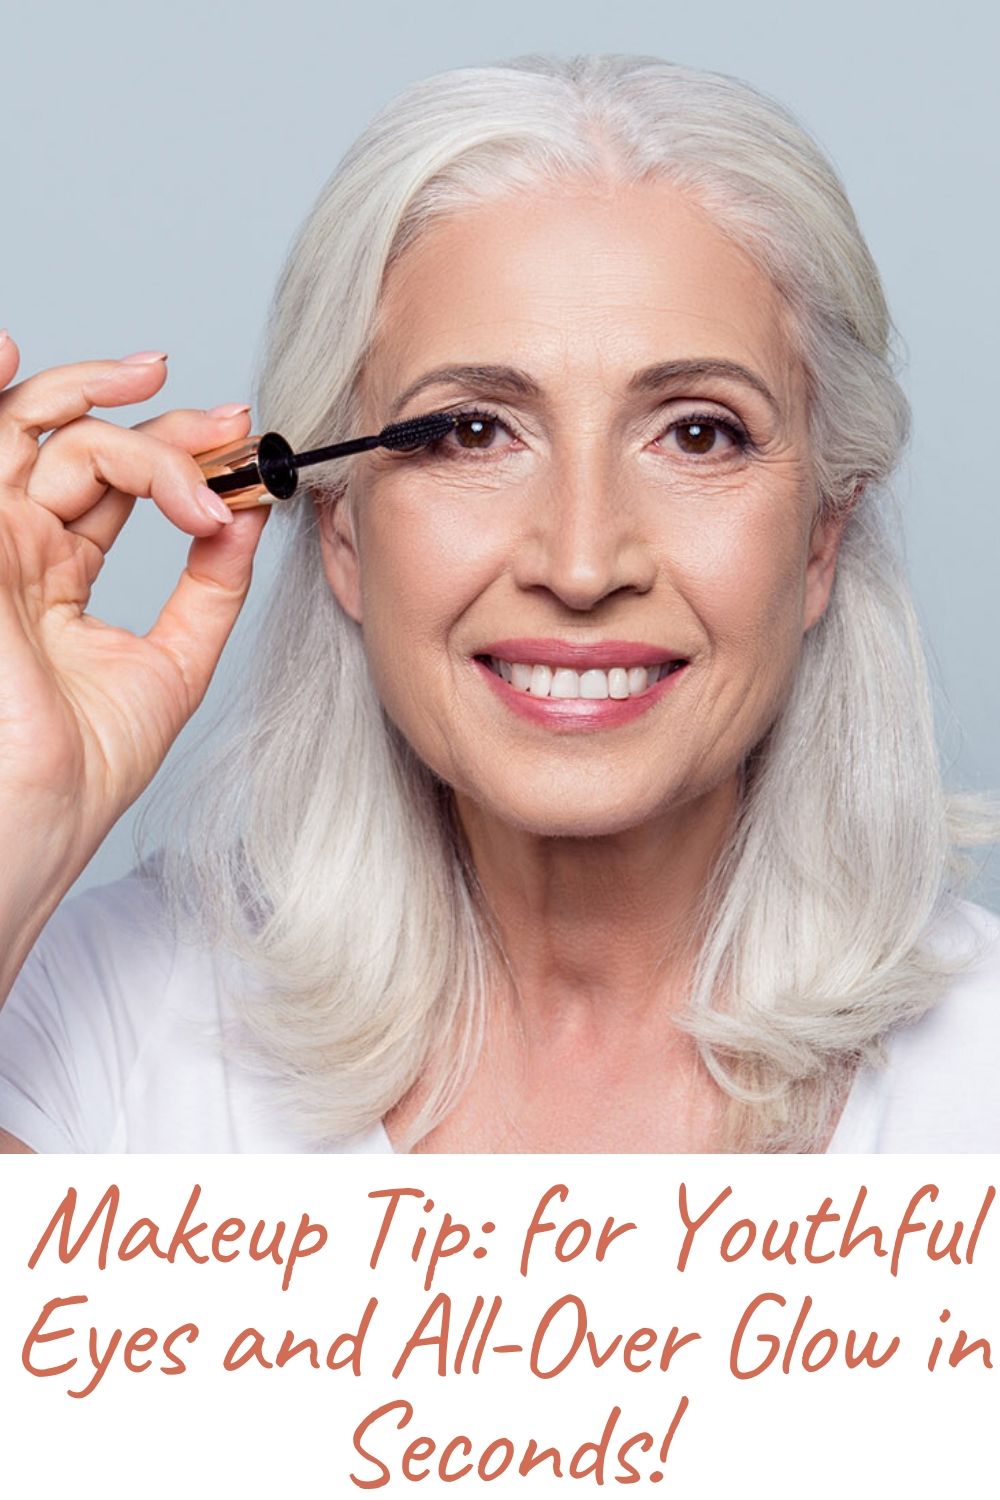 Makeup Tip: for Youthful Eyes and All-Over Glow in Seconds!